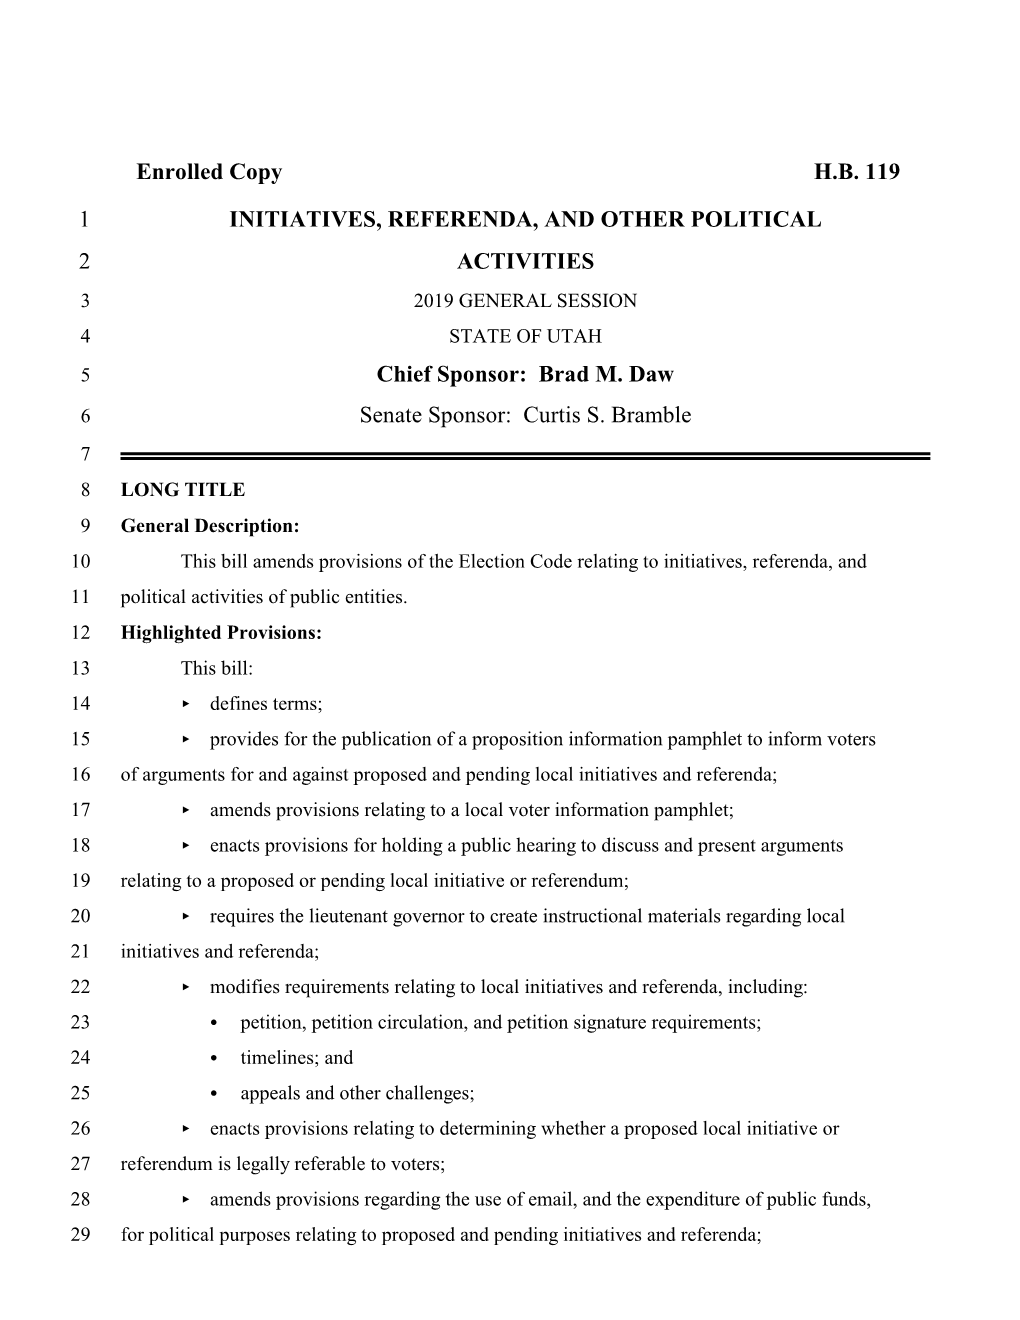 Enrolled Copy HB 119 1 INITIATIVES, REFERENDA, and OTHER